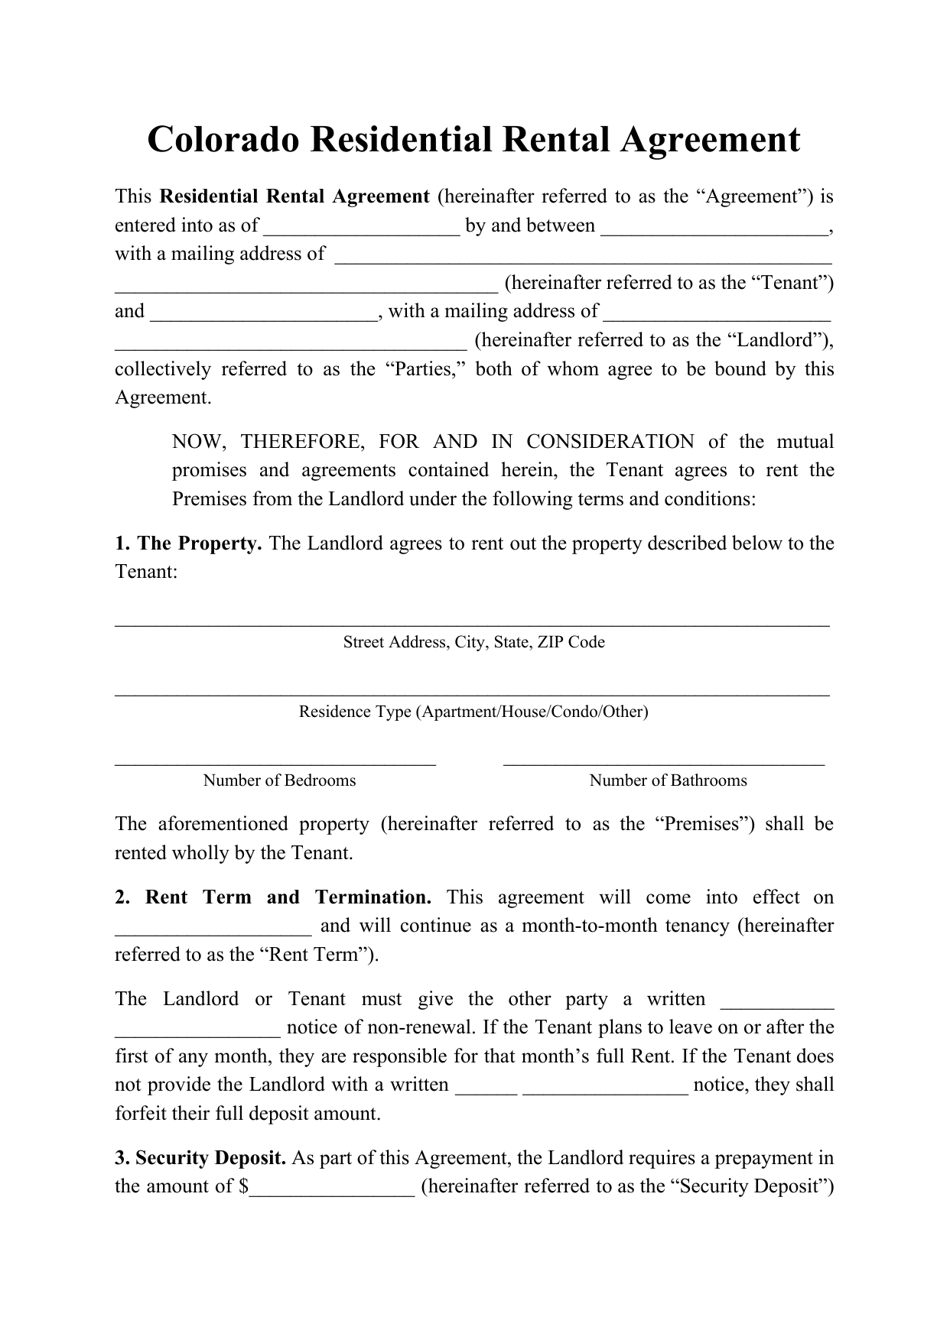 Residential Rental Agreement Template - Colorado, Page 1